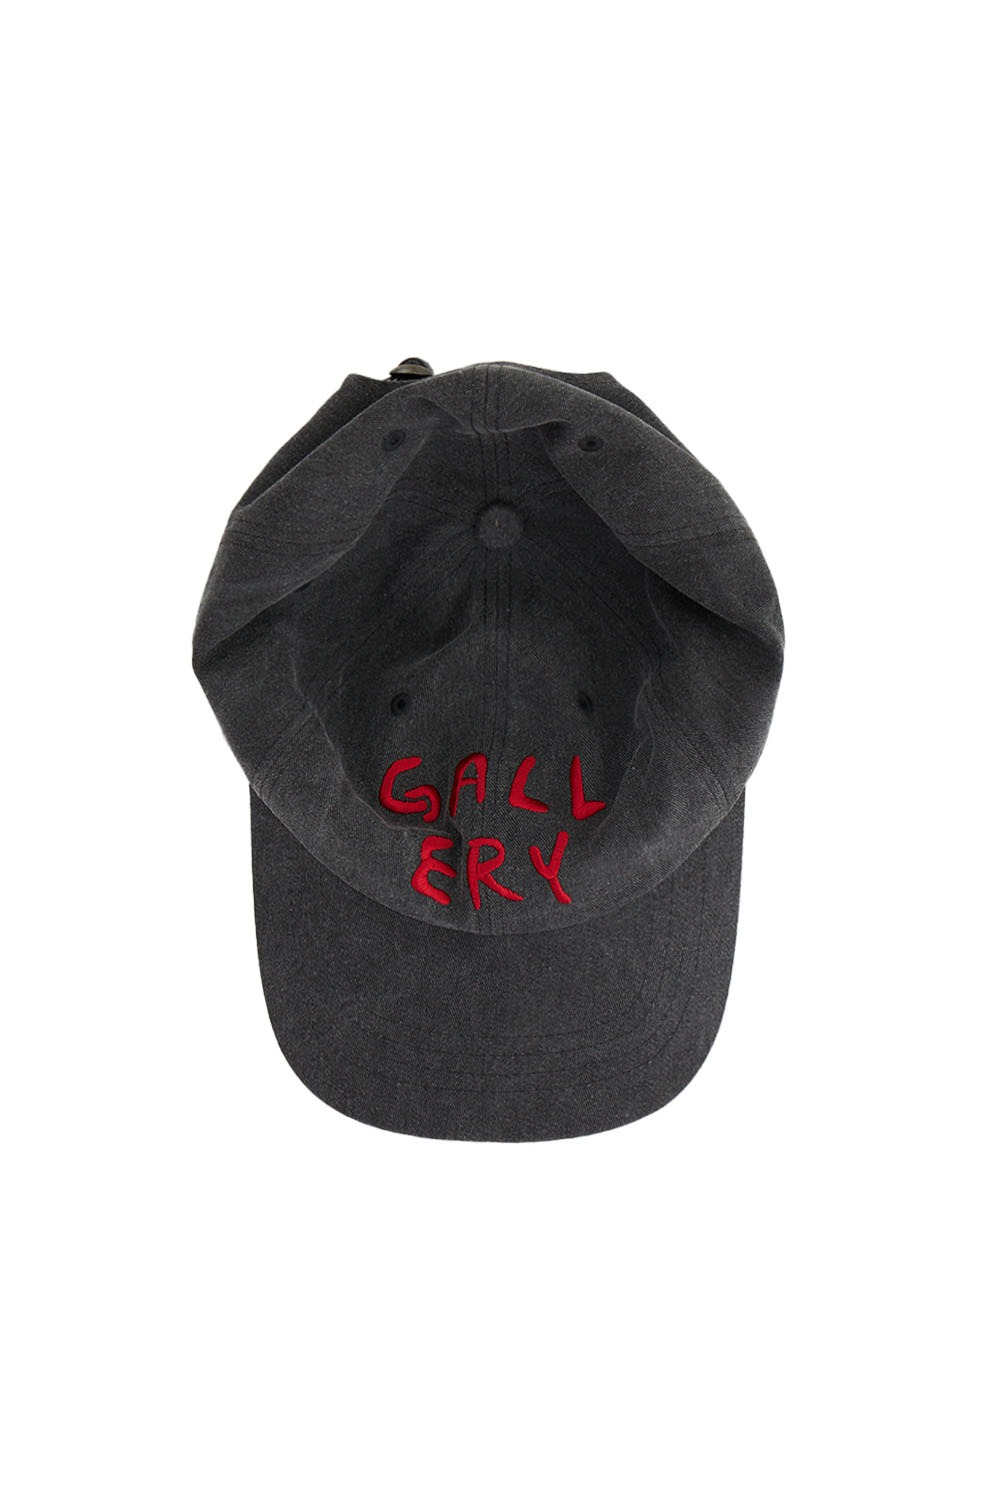 Gallery Pigment Ball Cap - Washed Black